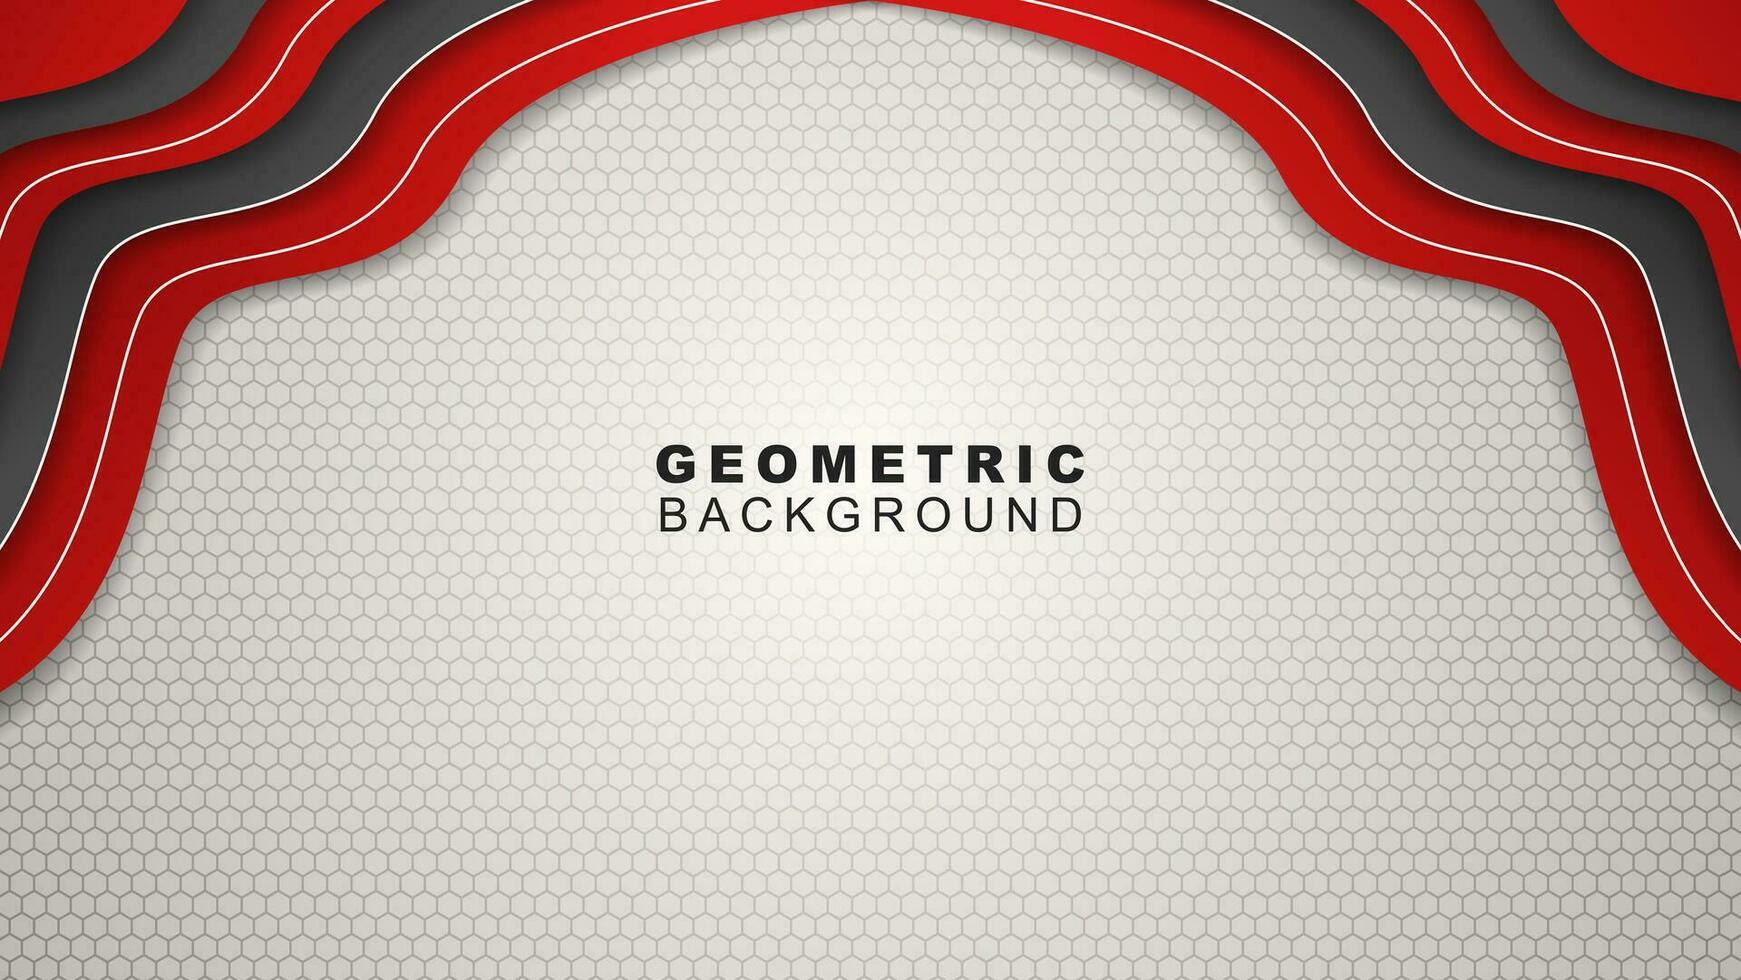 Geometric background in red and black frame with hexagon pattern, offline streaming background and, gaming banner vector